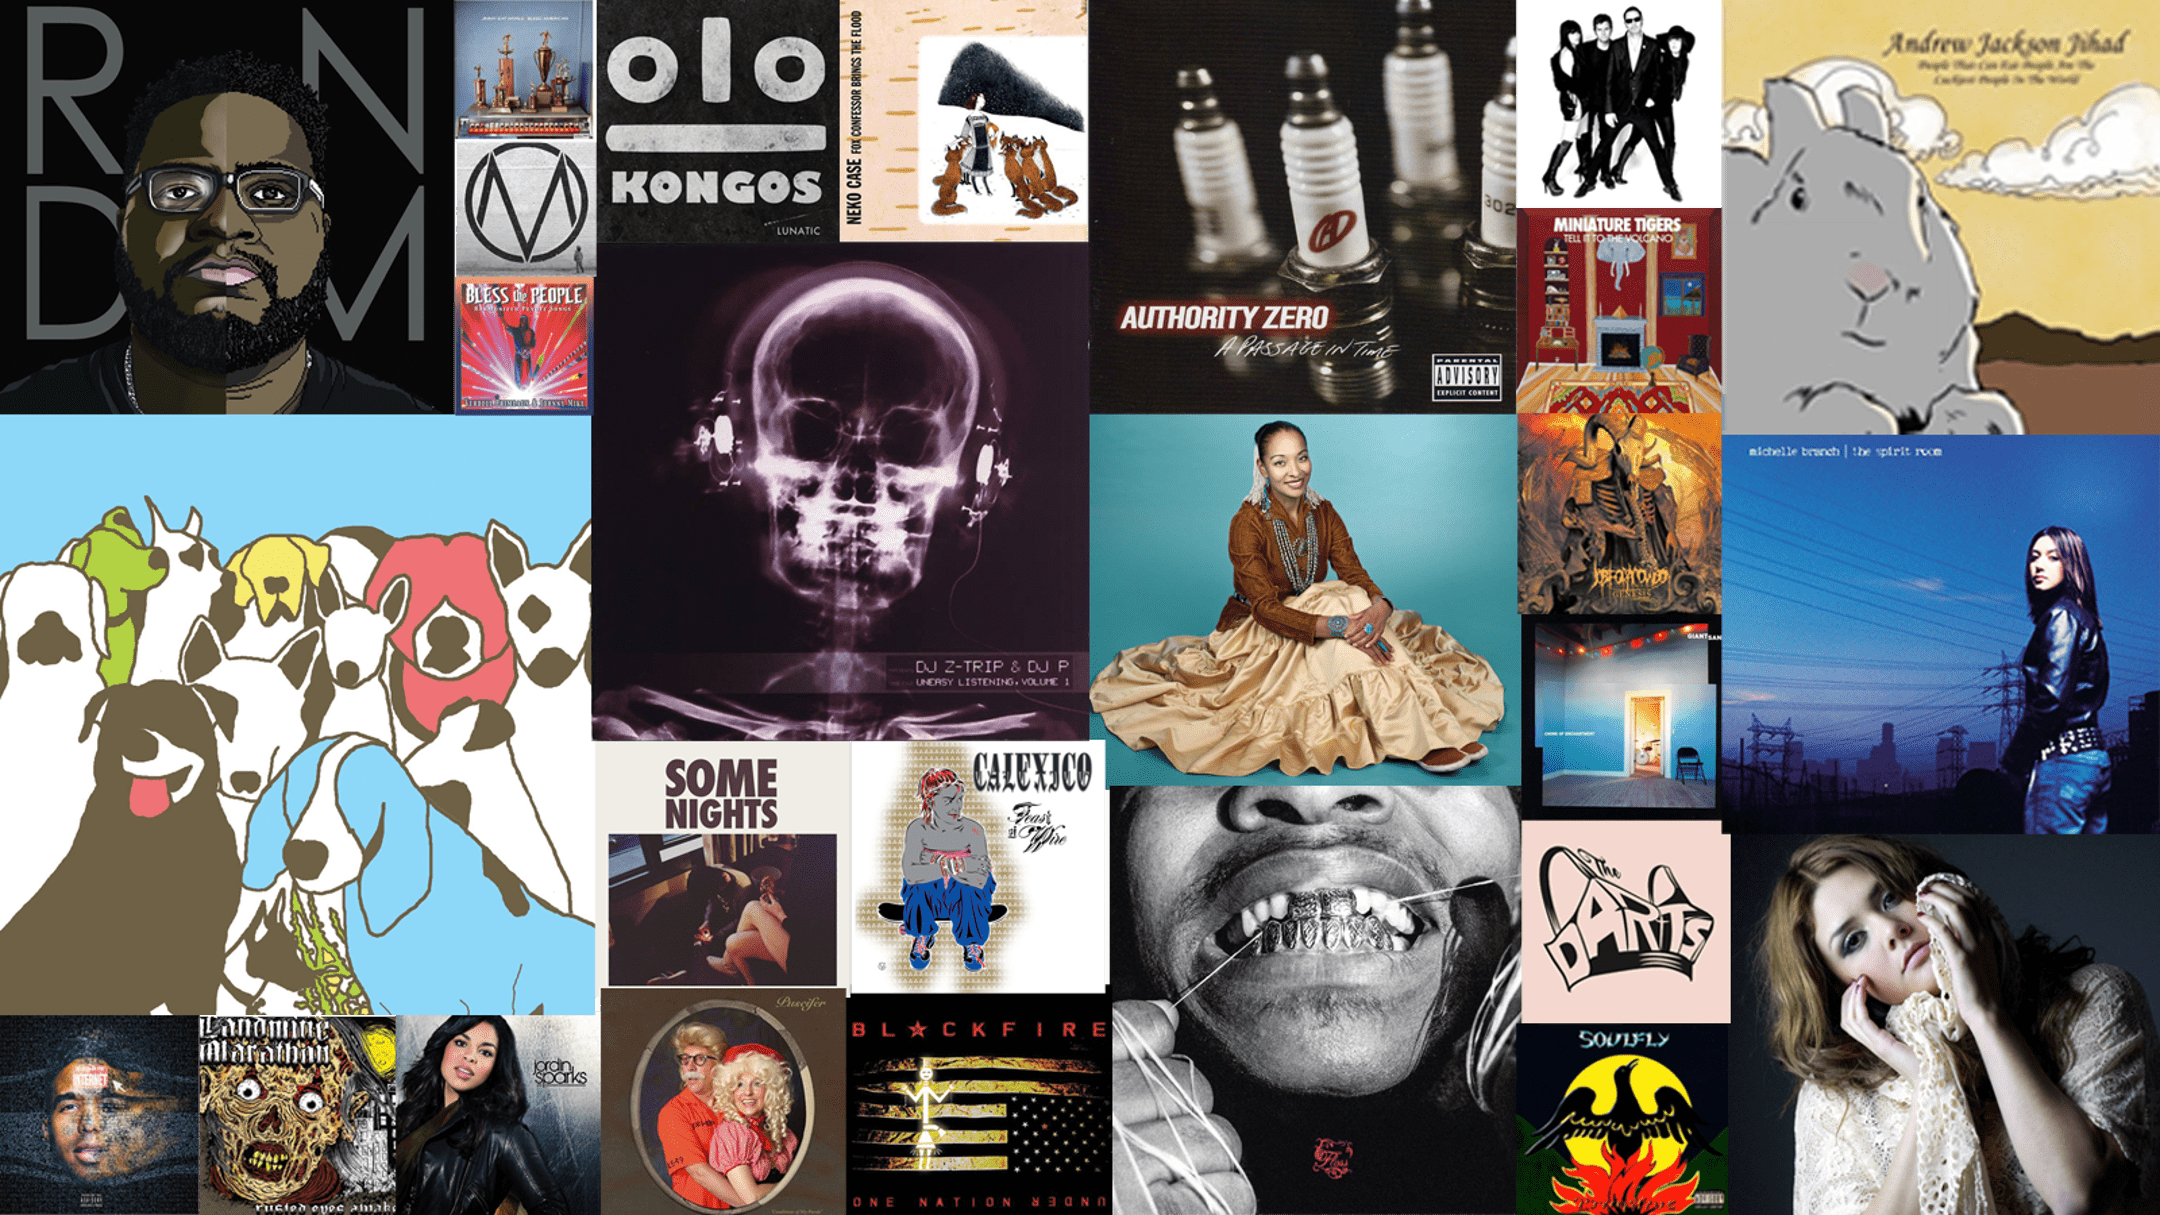 Collage of the best albums of 2010s - 2000s